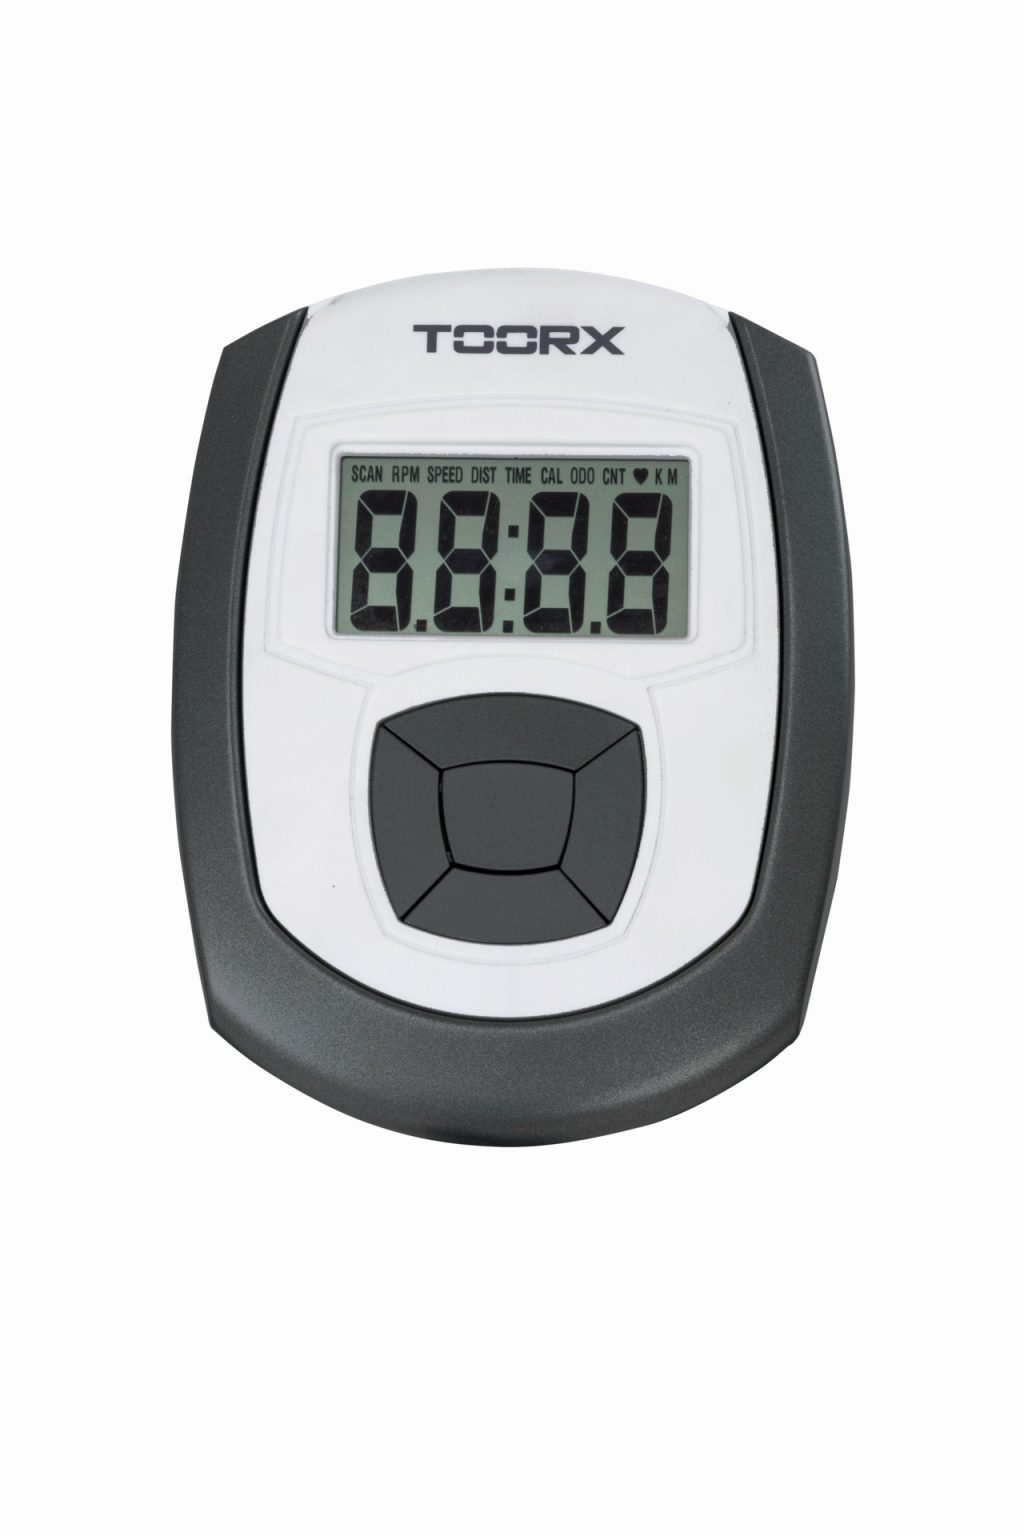 Toorx – Cyclette – Brx 55 Comfort